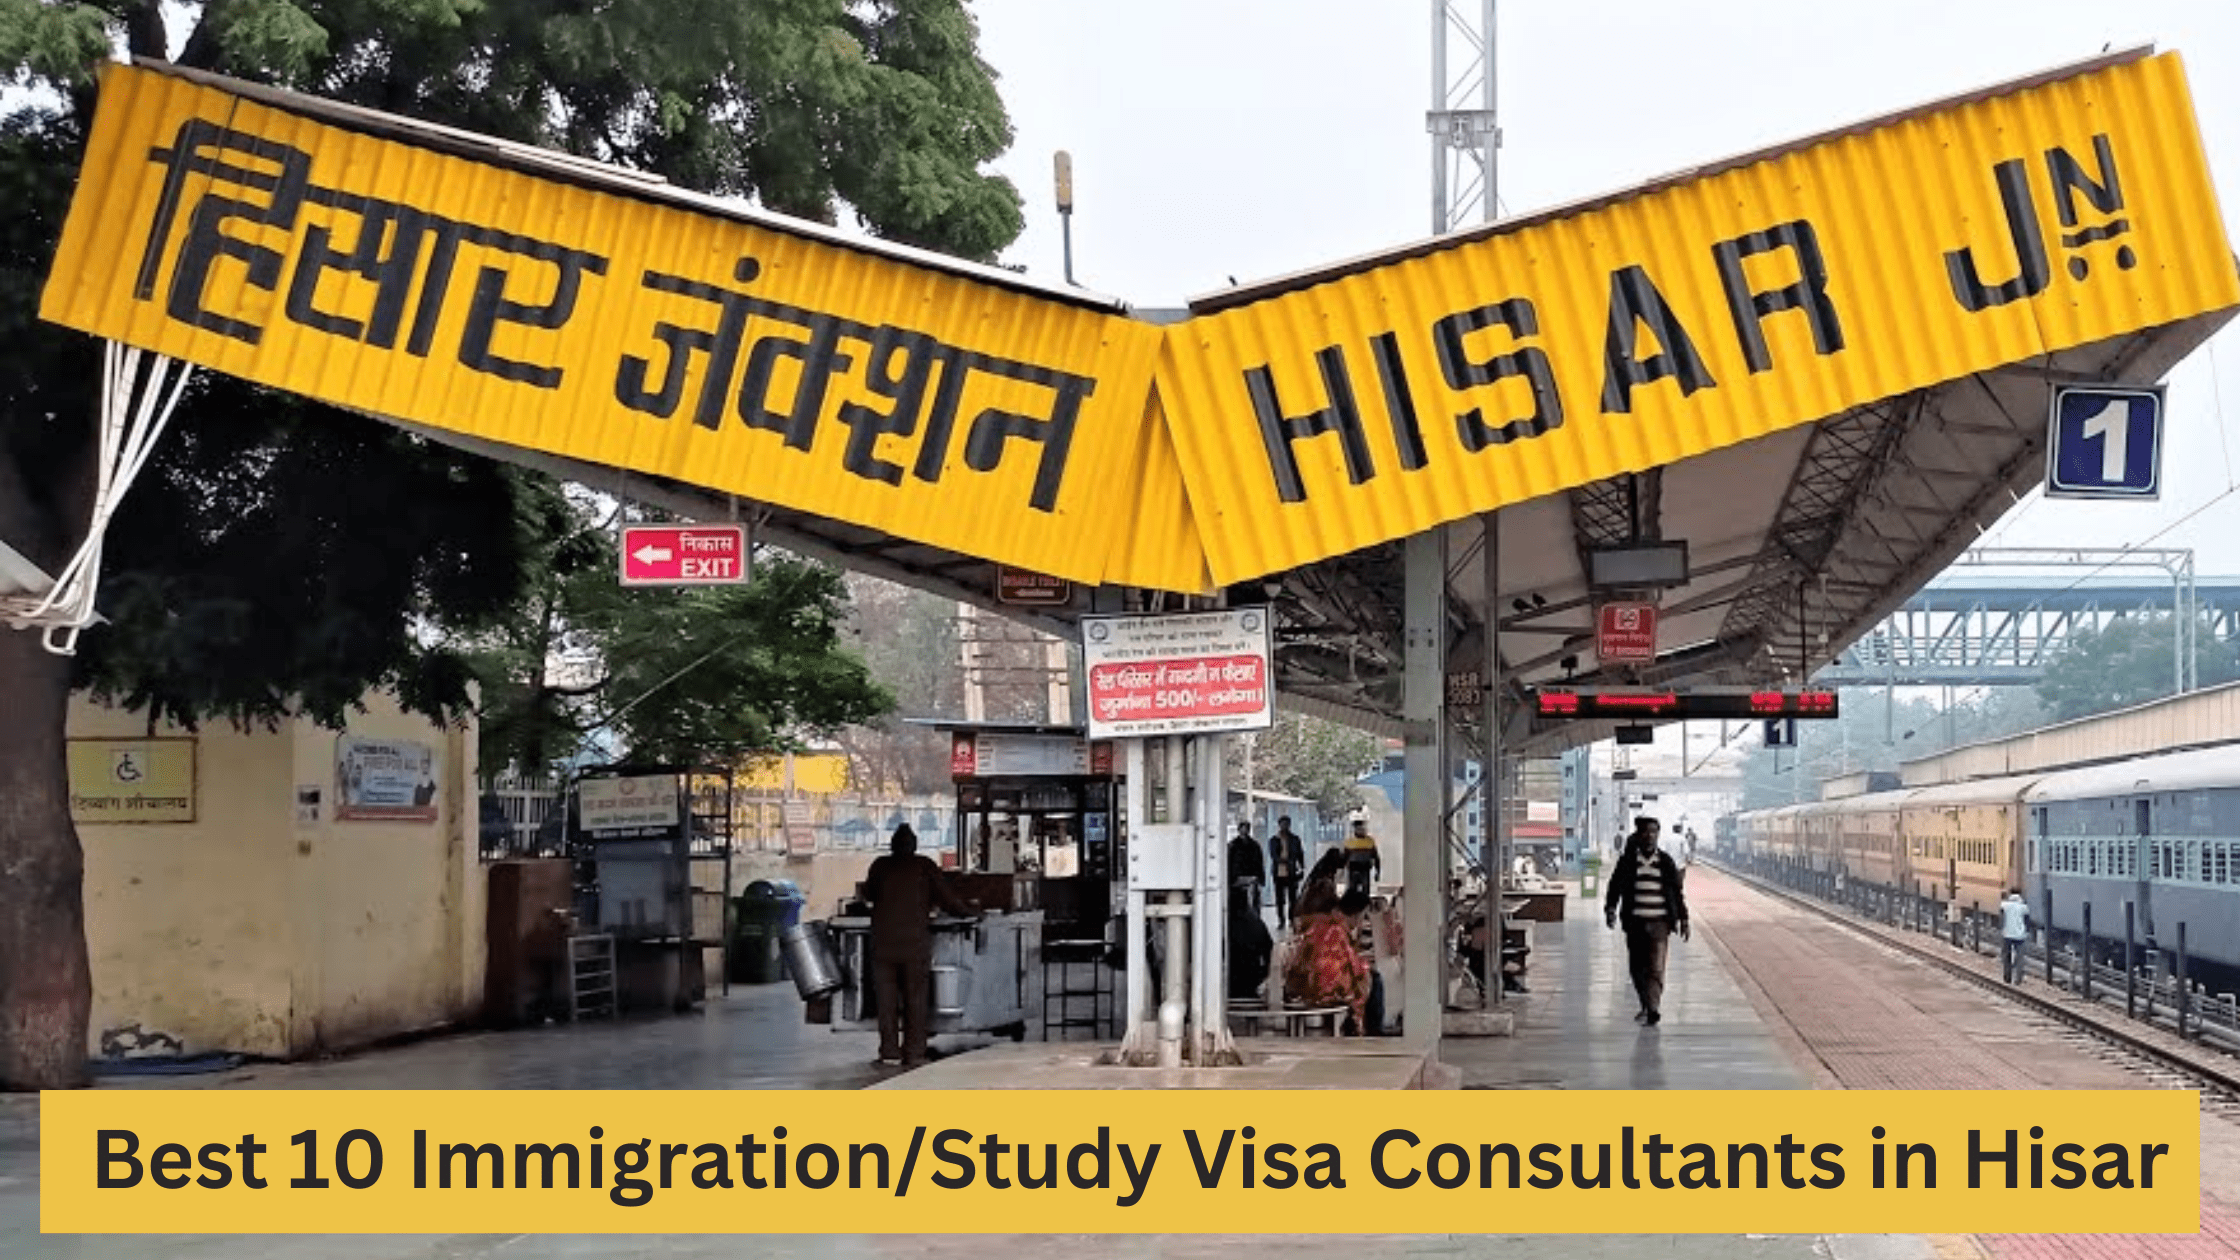 Best 10 Immigration/Study Visa Consultants in Hisar